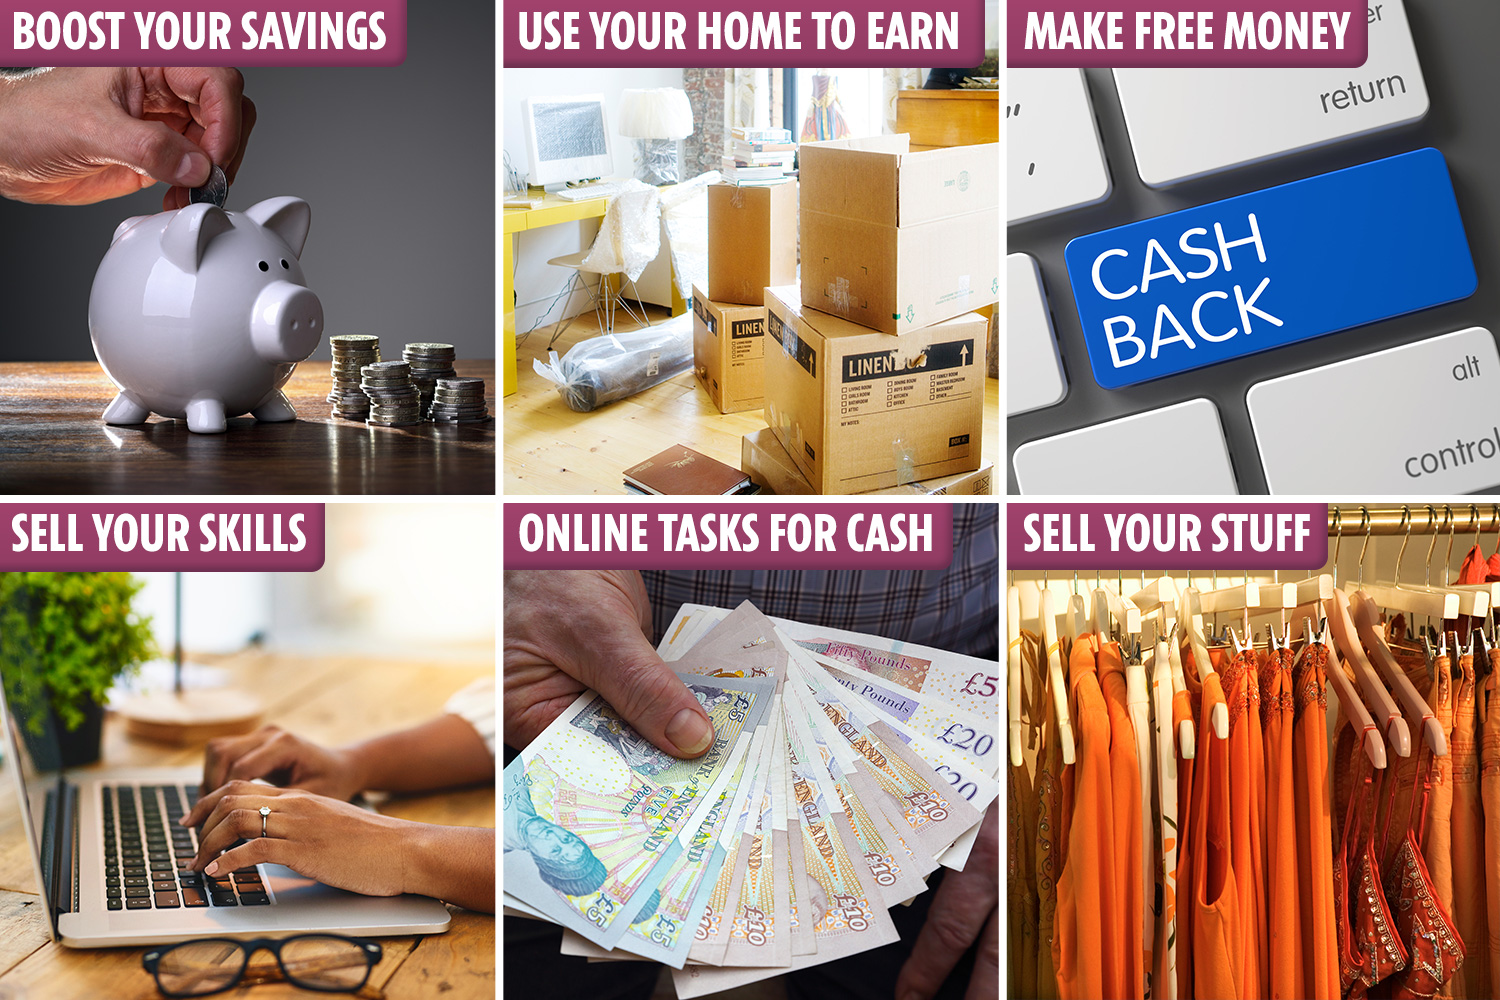 There are many ways you can earn extra cash on the side